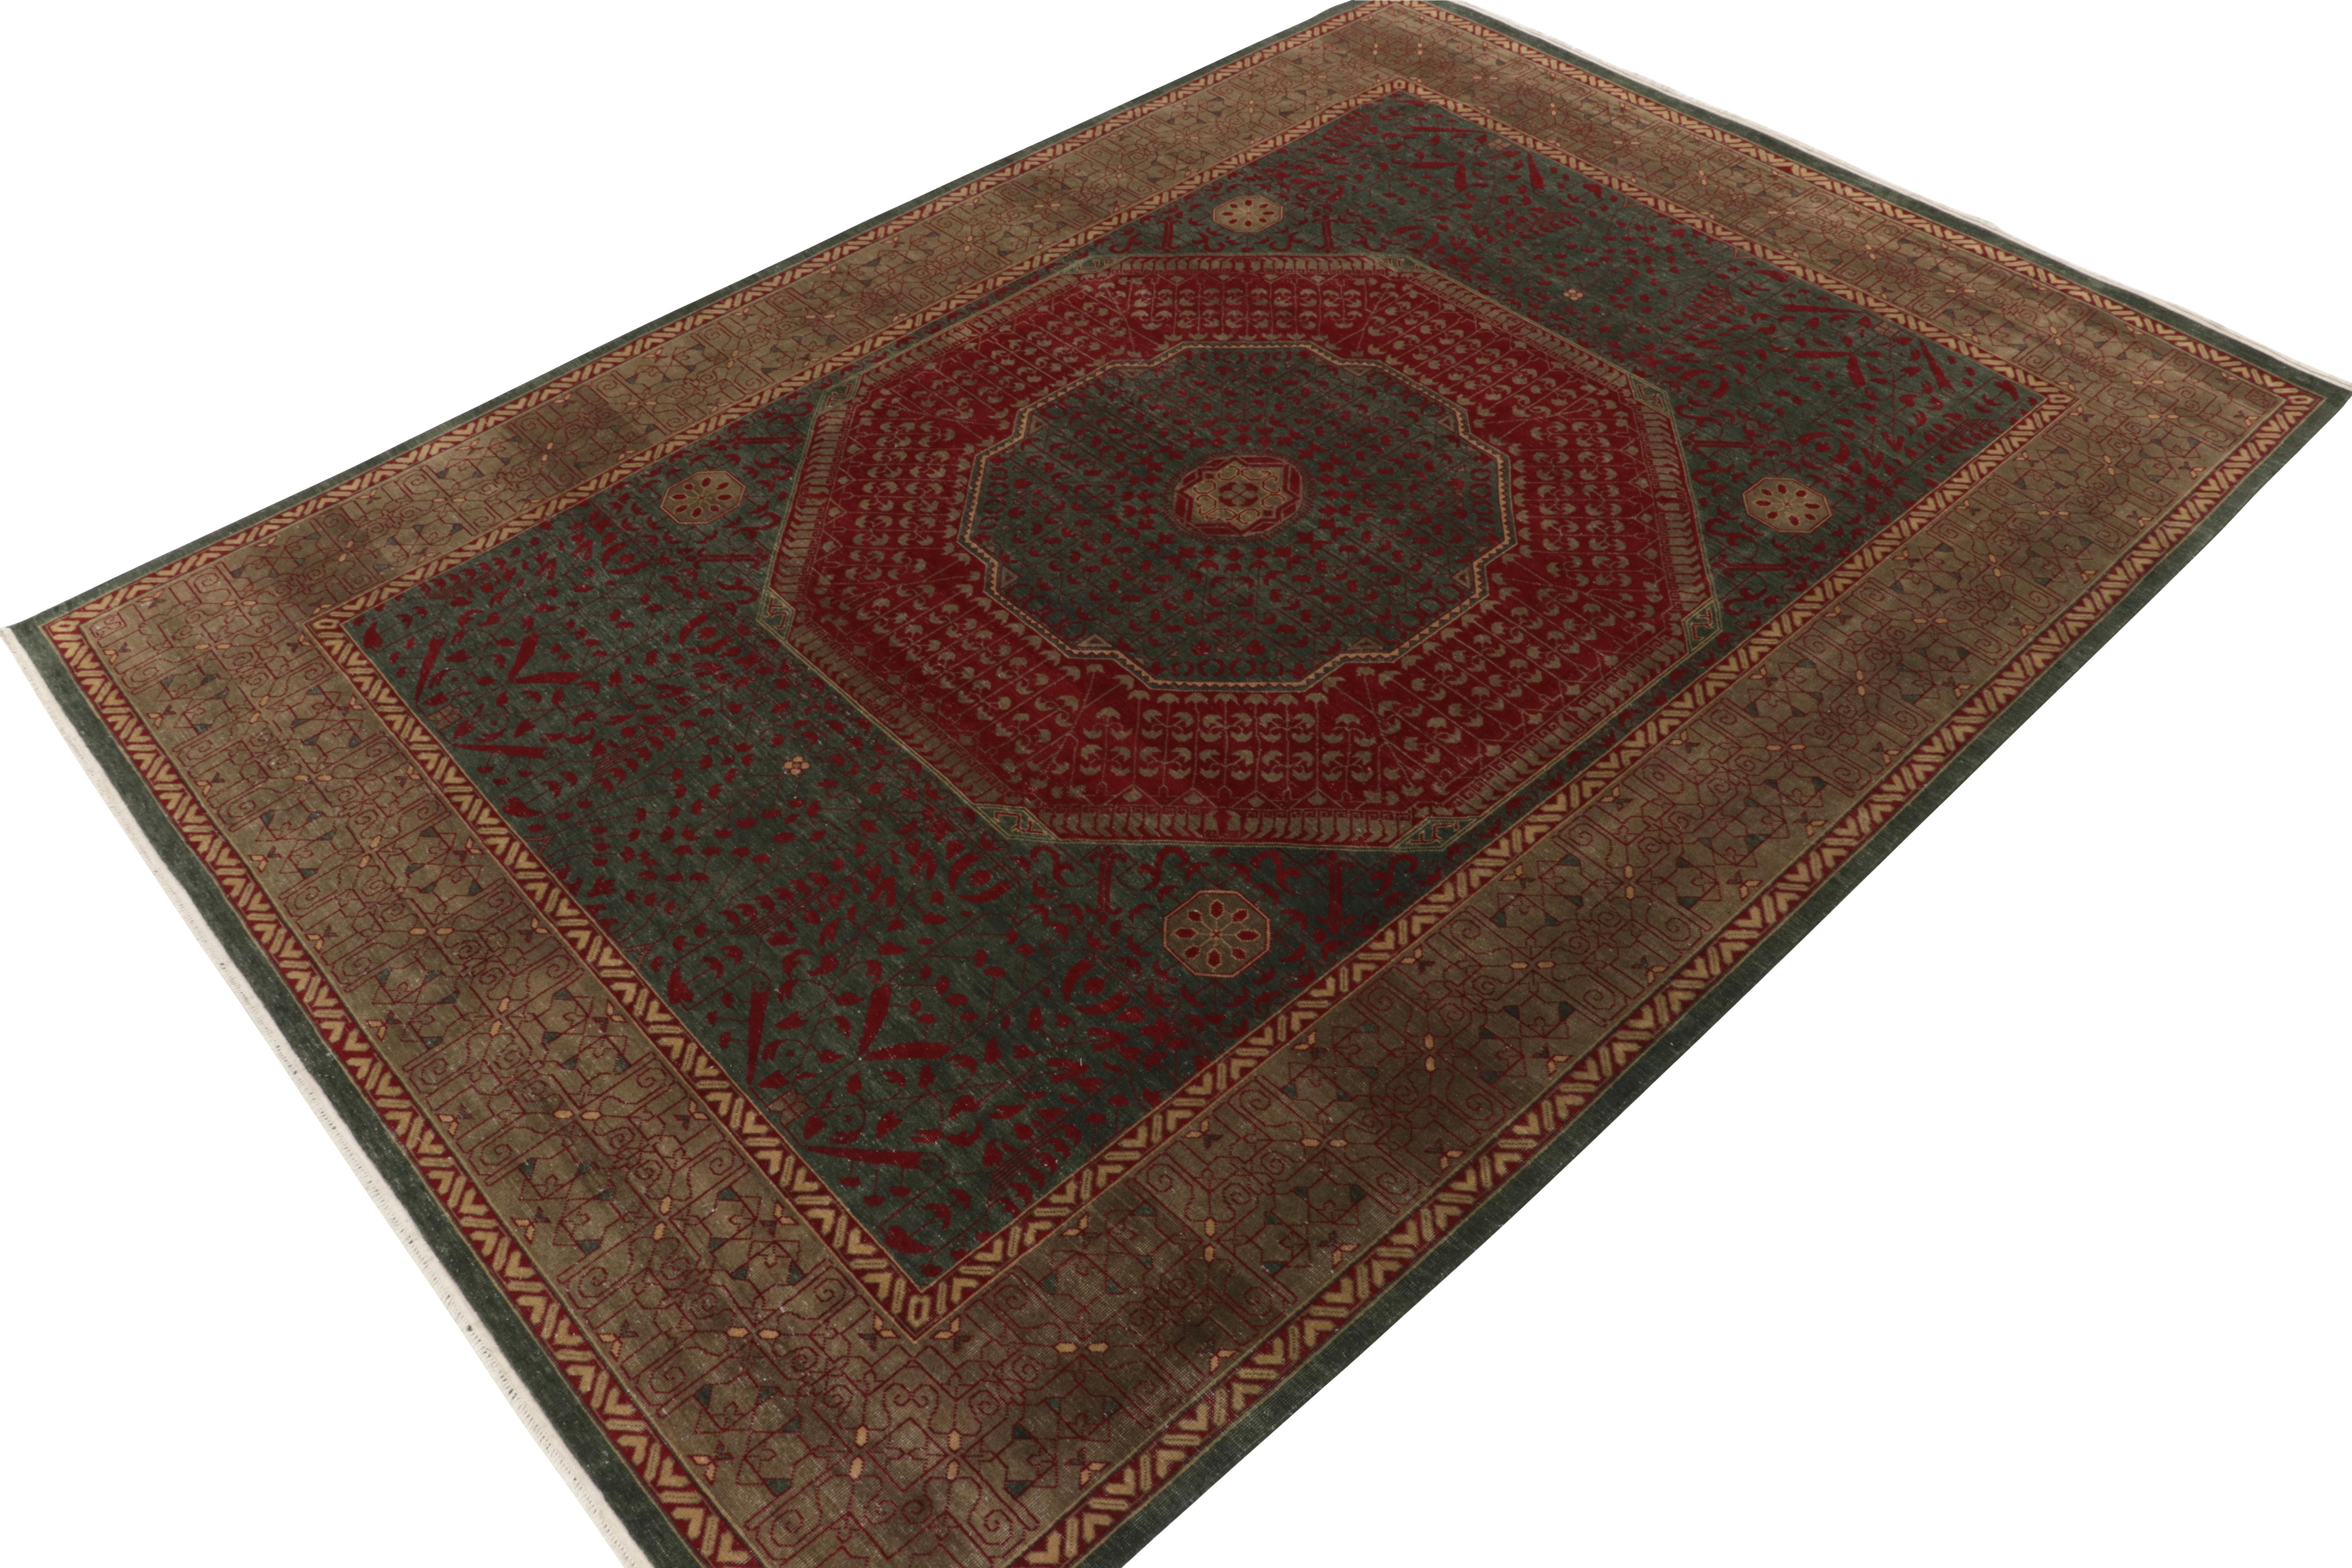 Hand-knotted in fine quality wool & silk, a gorgeous 10x14 rug inspired by 17th century antique Mogul rugs.

On the Design: New to our Modern Classics collection, the design depicts an elaborate classic geometric-floral design in teal green, red &